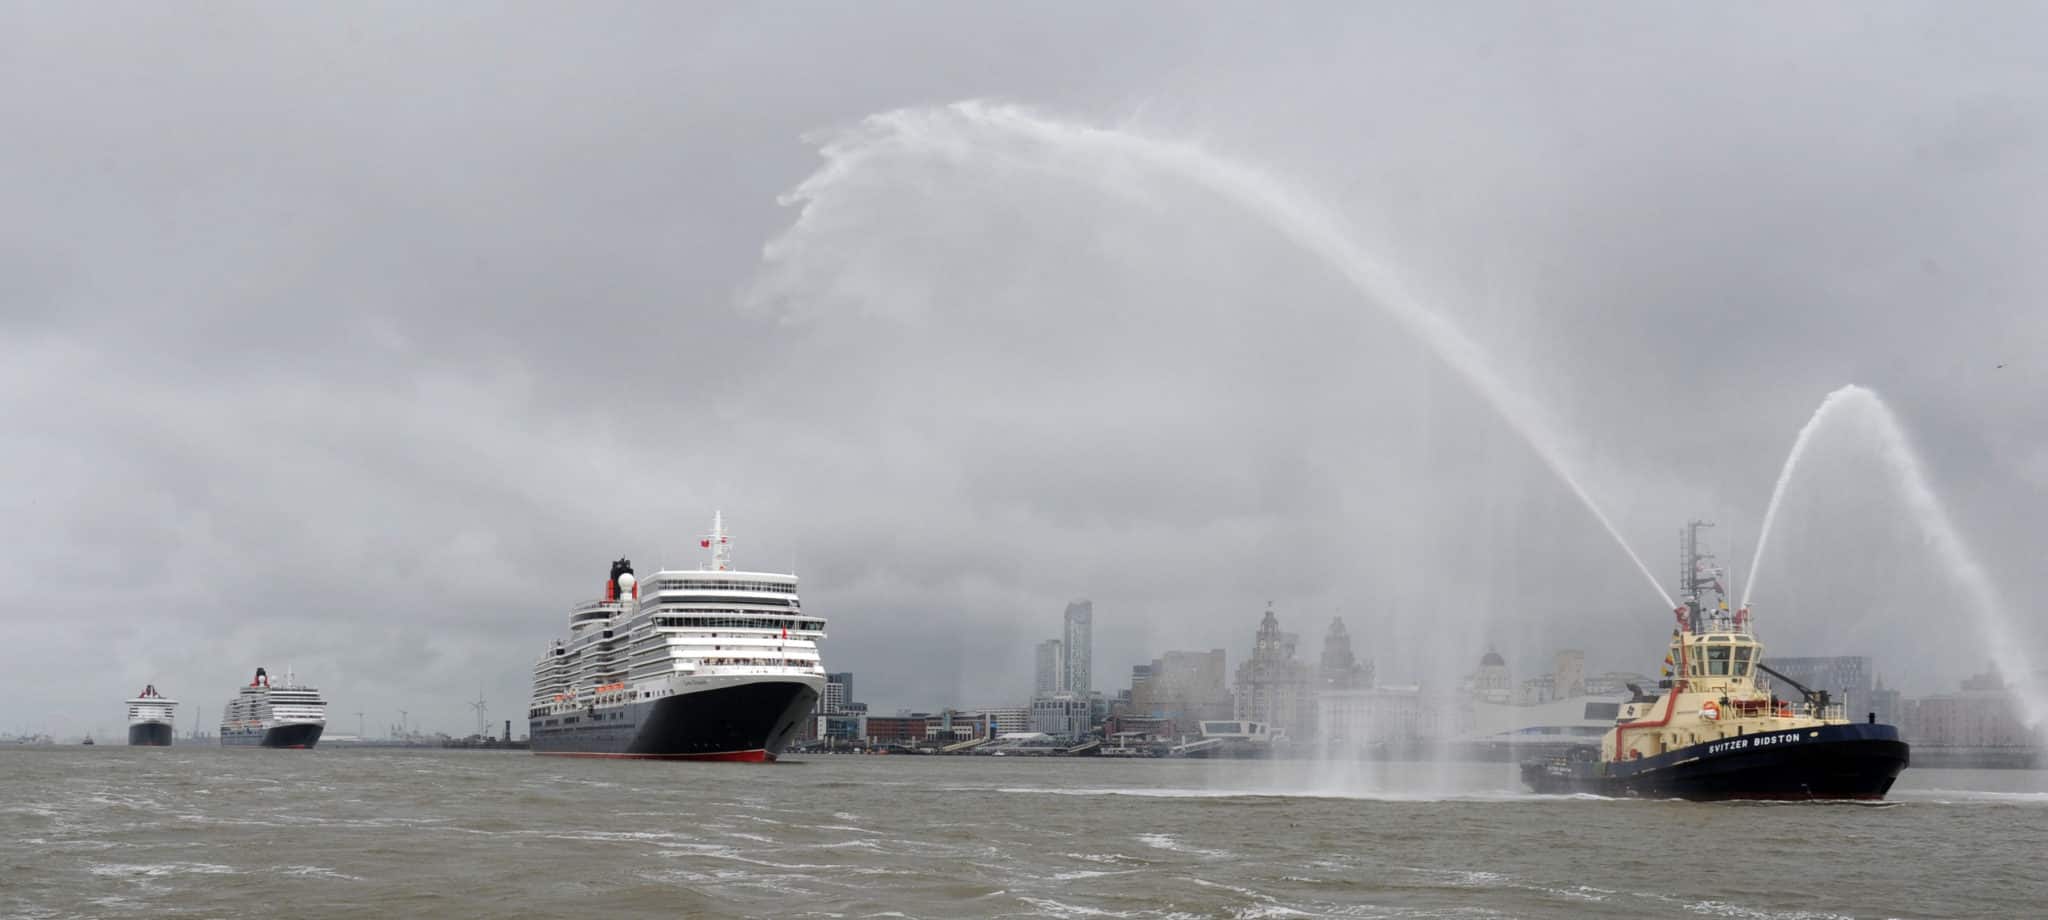 Cunard’s Three Queens Perform River Dance on the Mersey in Salute to Liverpool Where the Company Began 175 Years Ago | 28